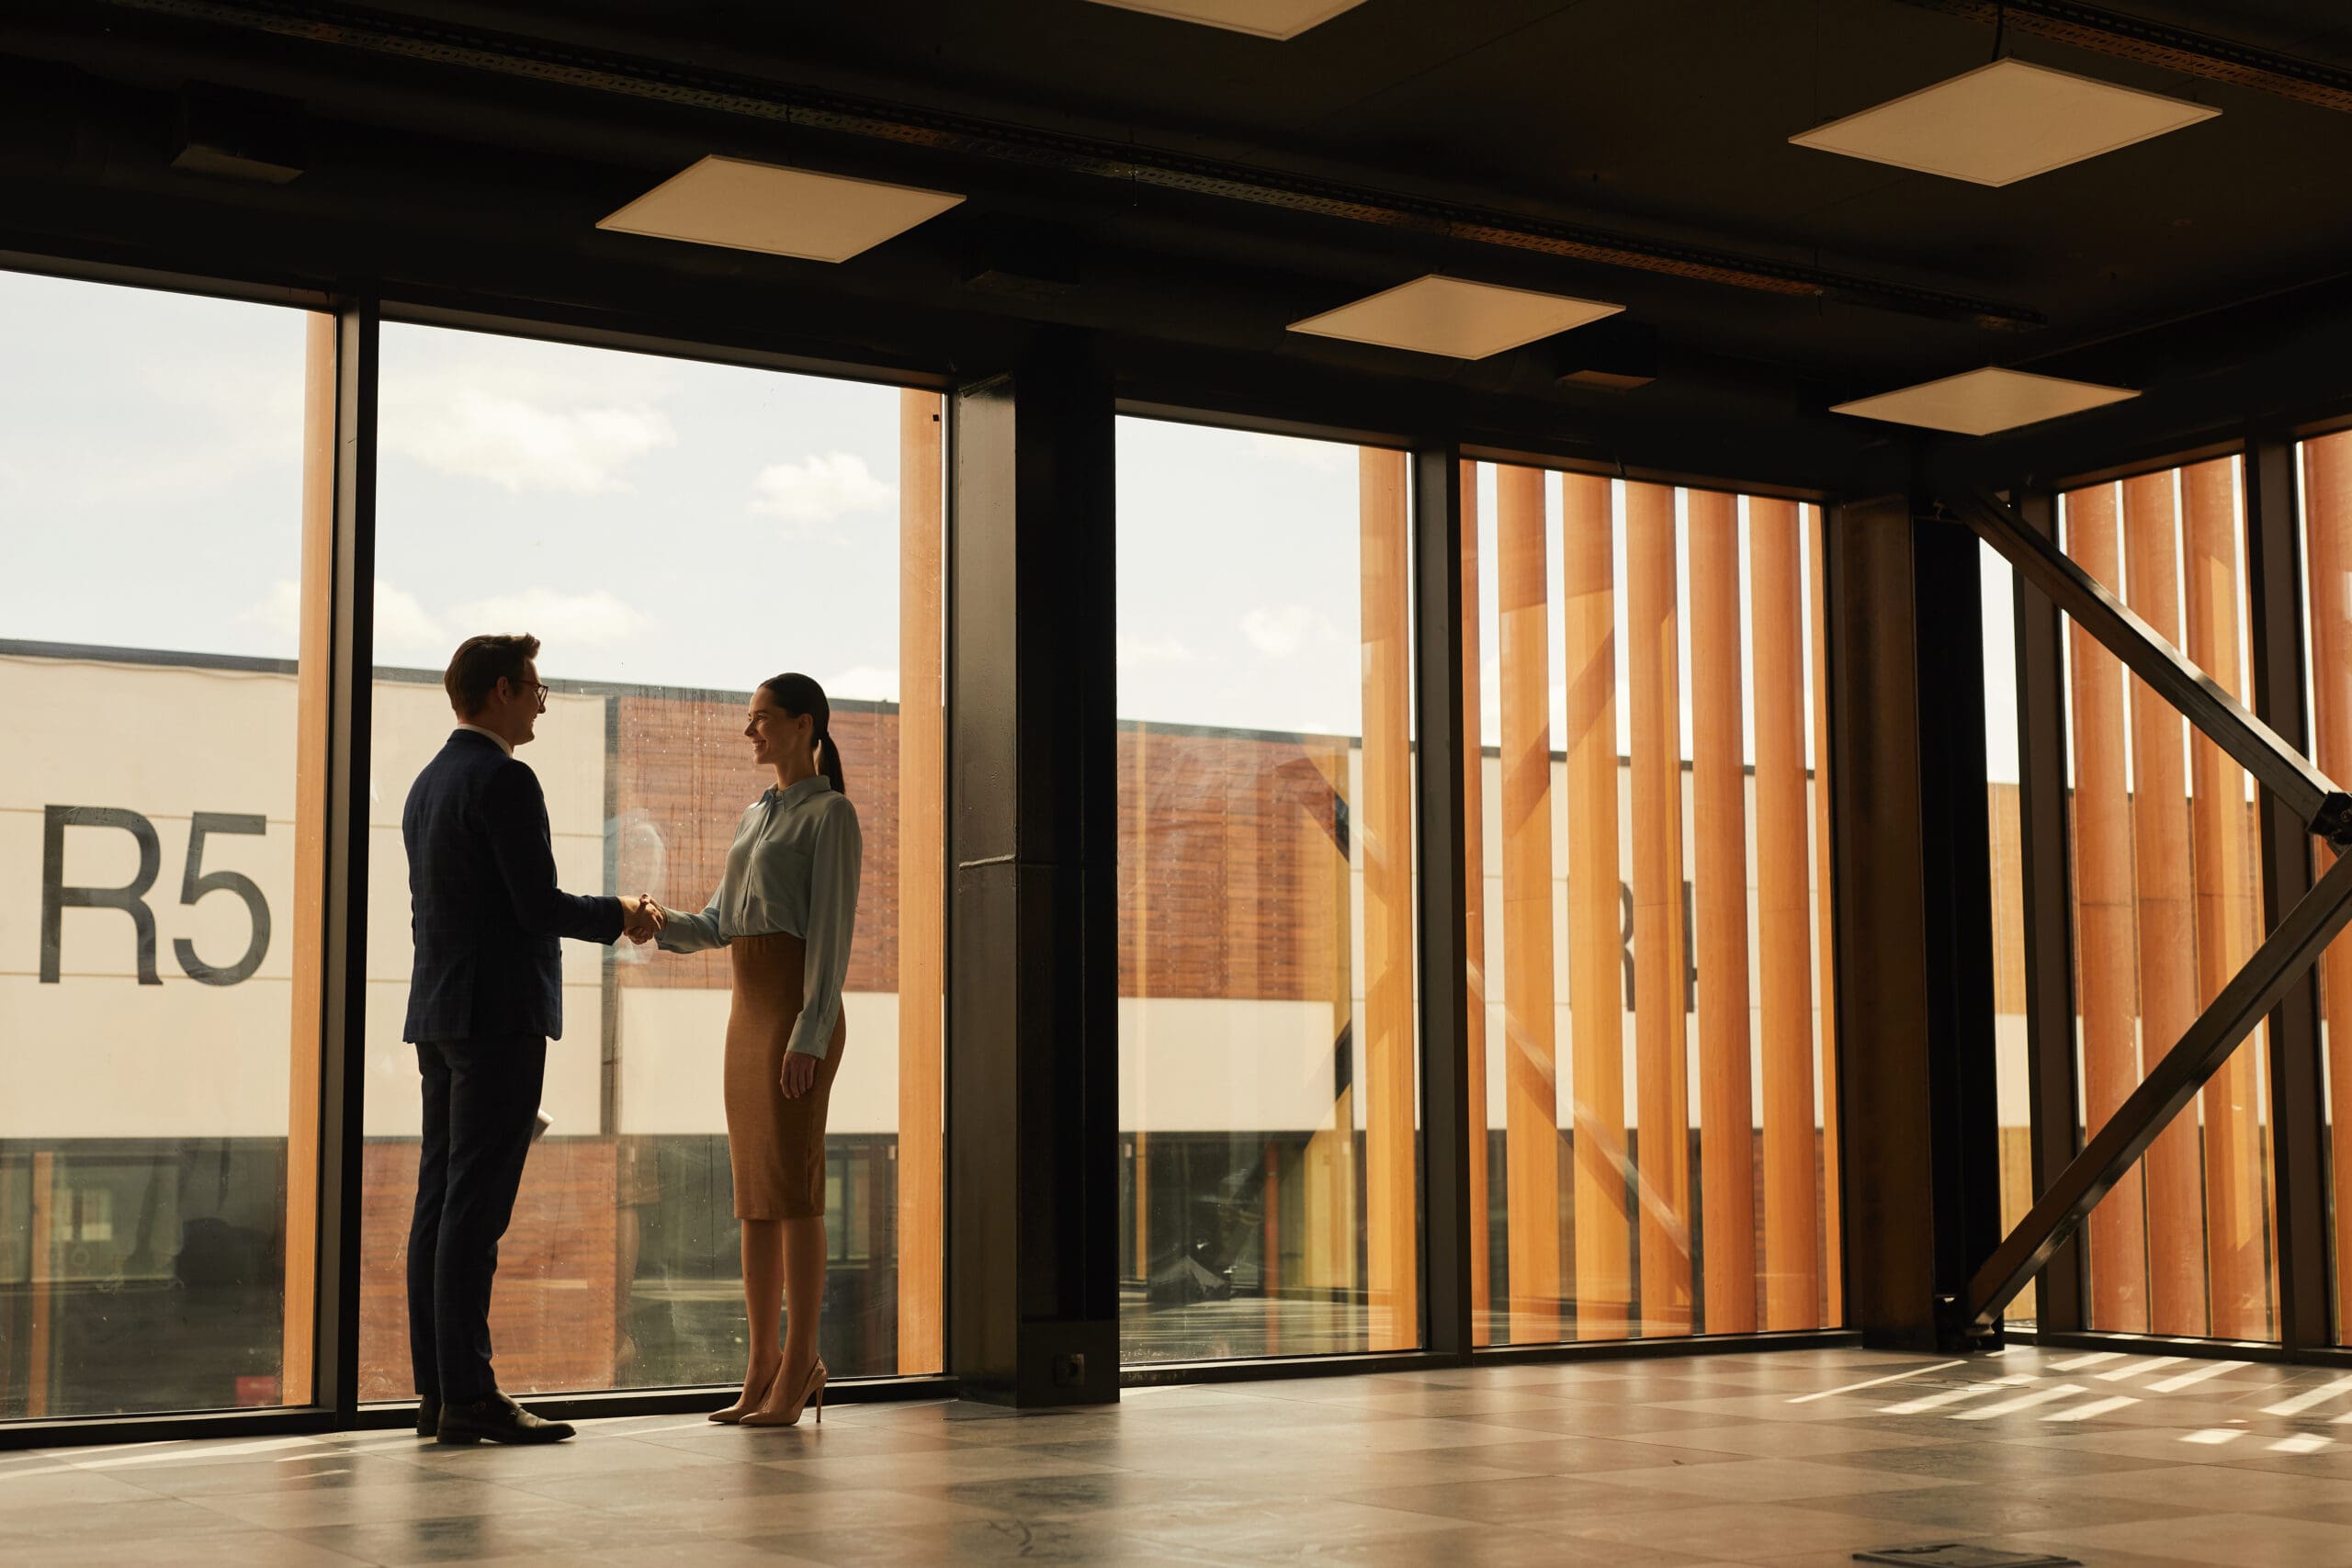 A man and woman shaking hands in a building